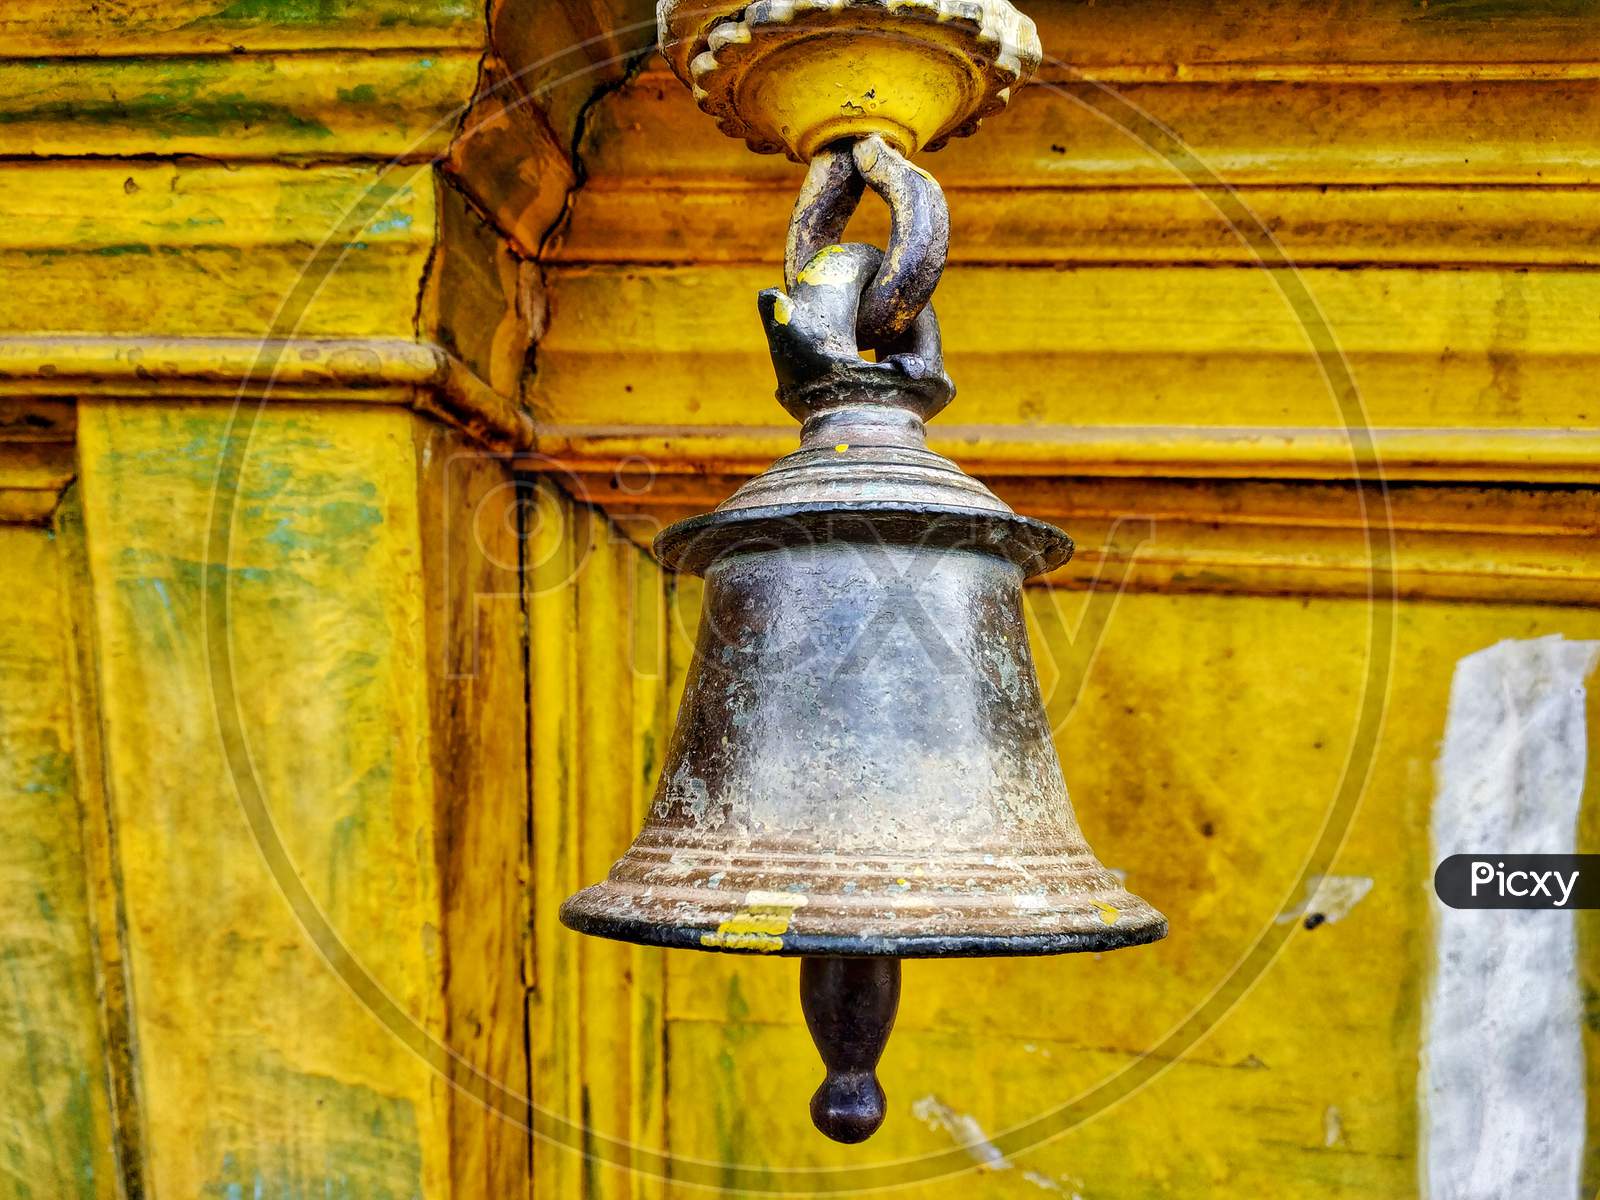 Bell on the Chariot